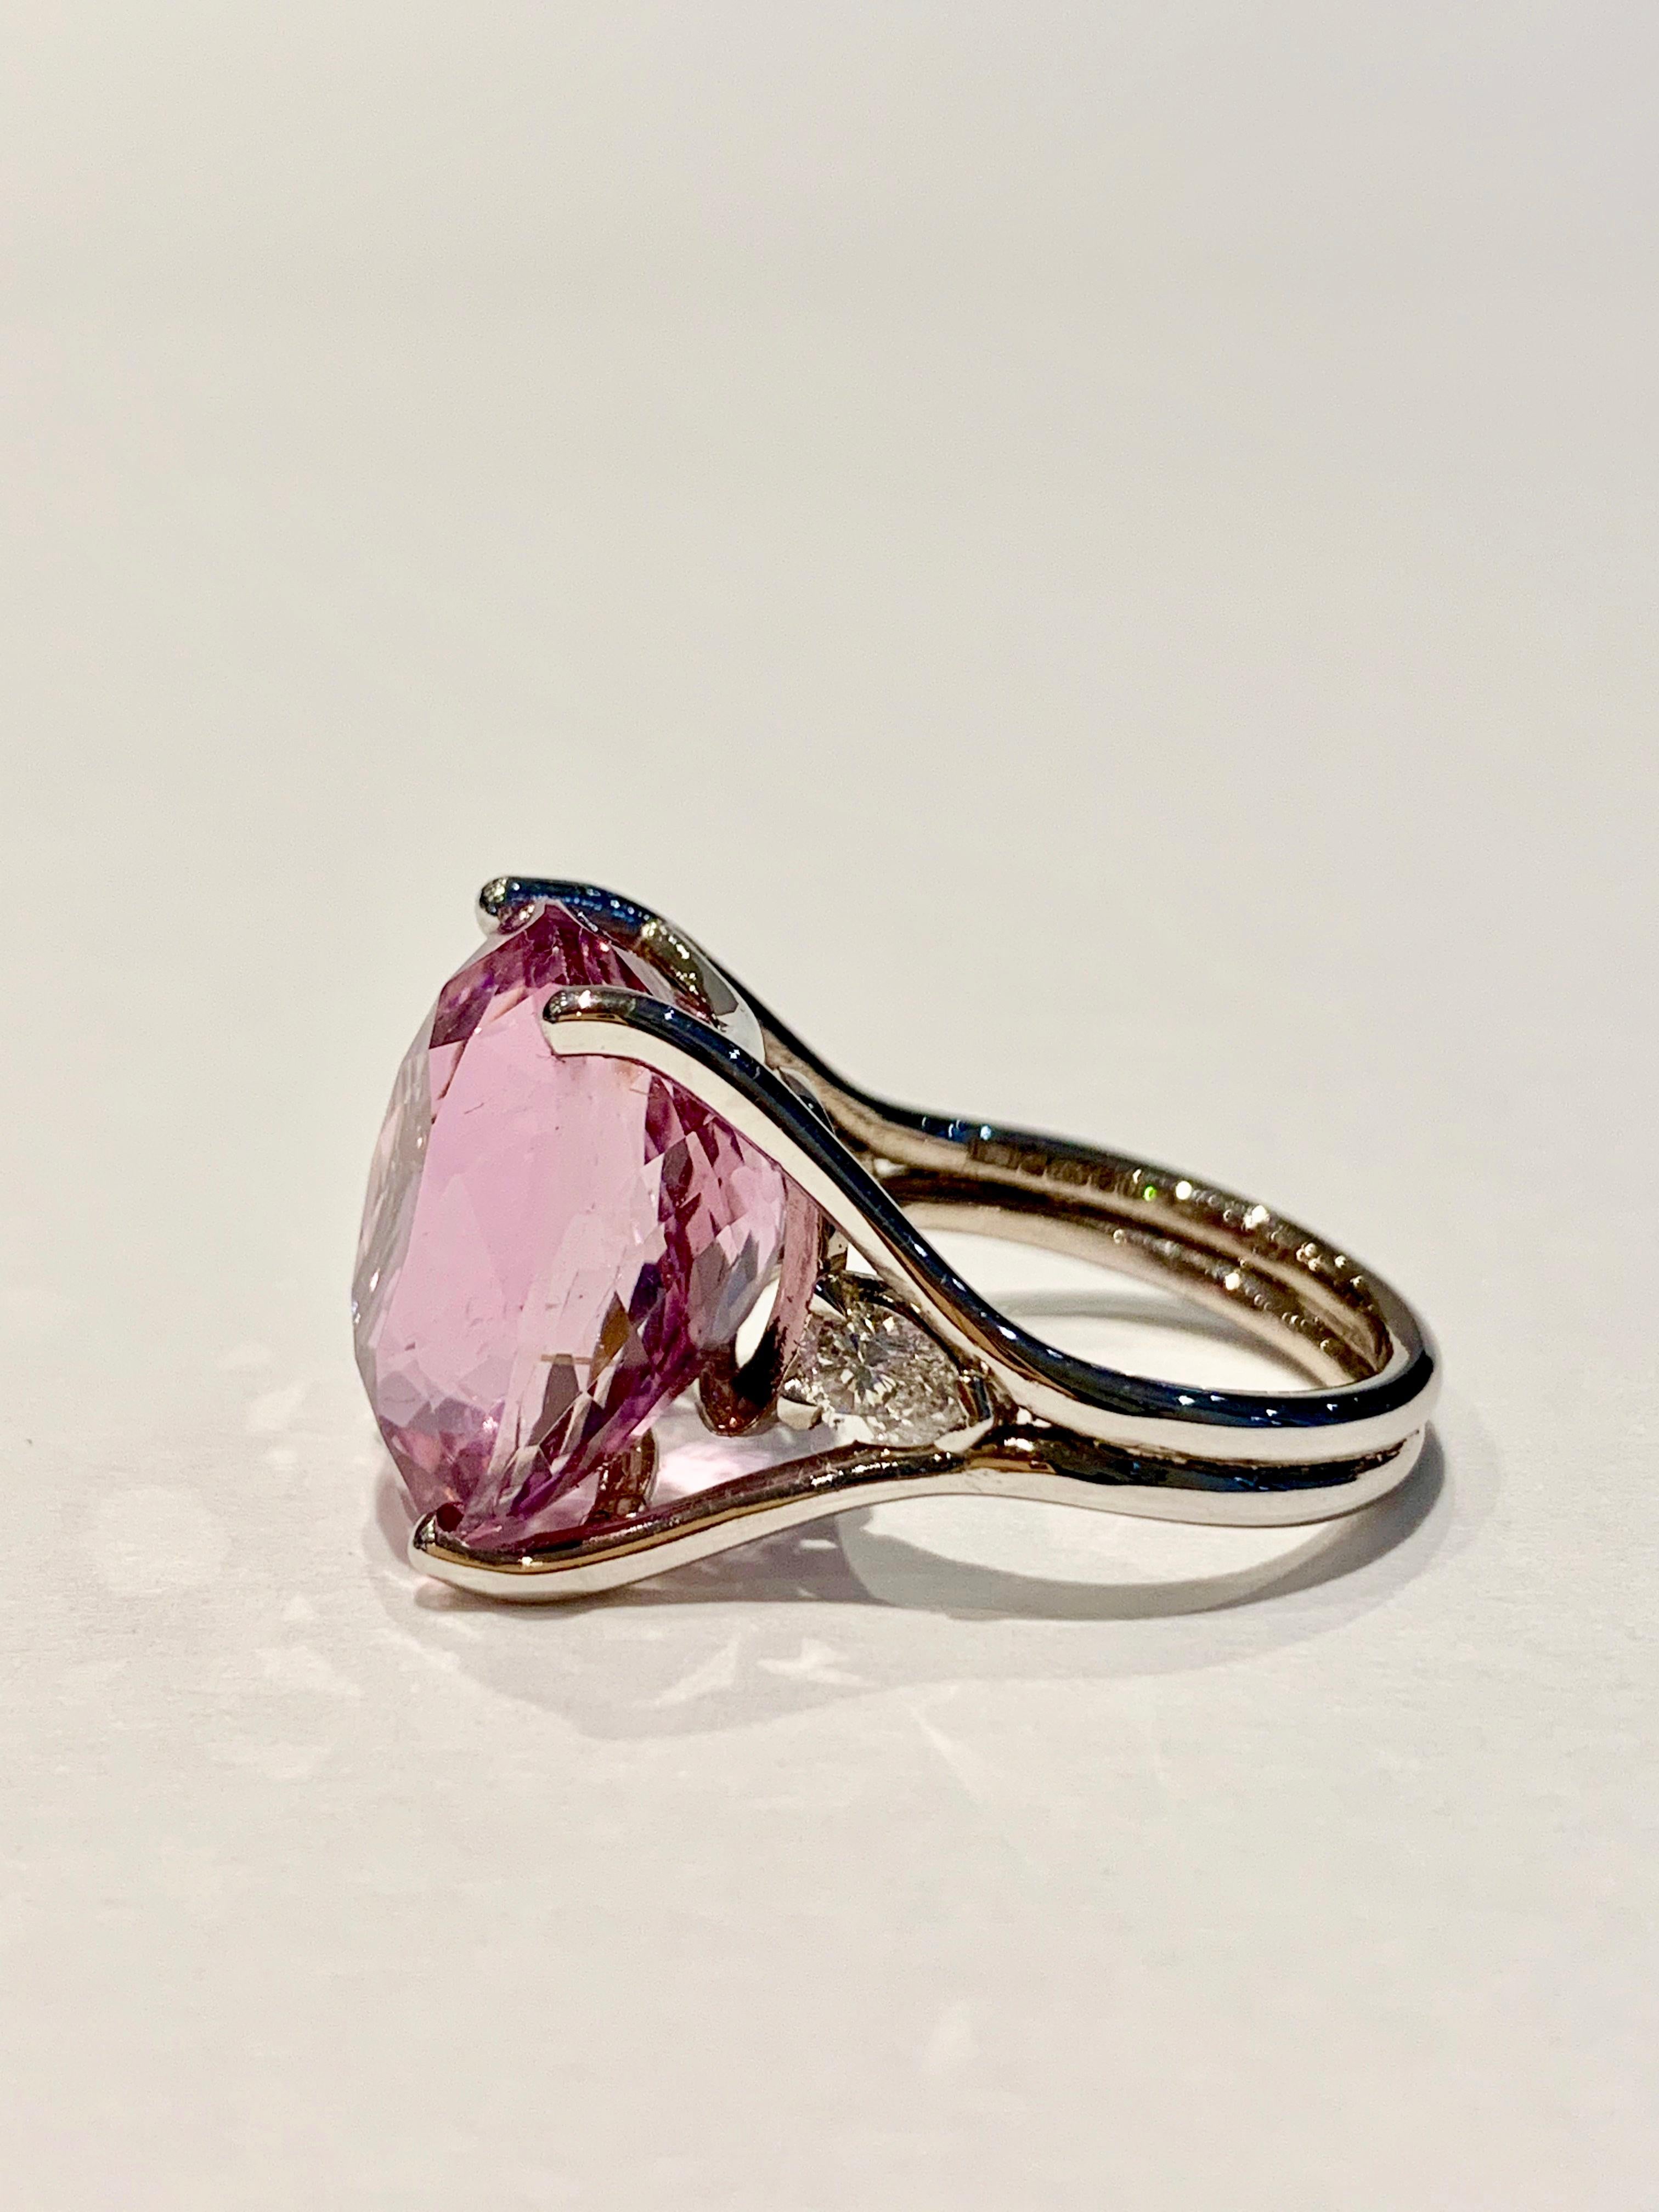 Modern Bespoke 18 Carat Pink Oval Kunzite and Diamond Ring in 18 Carat White Gold For Sale